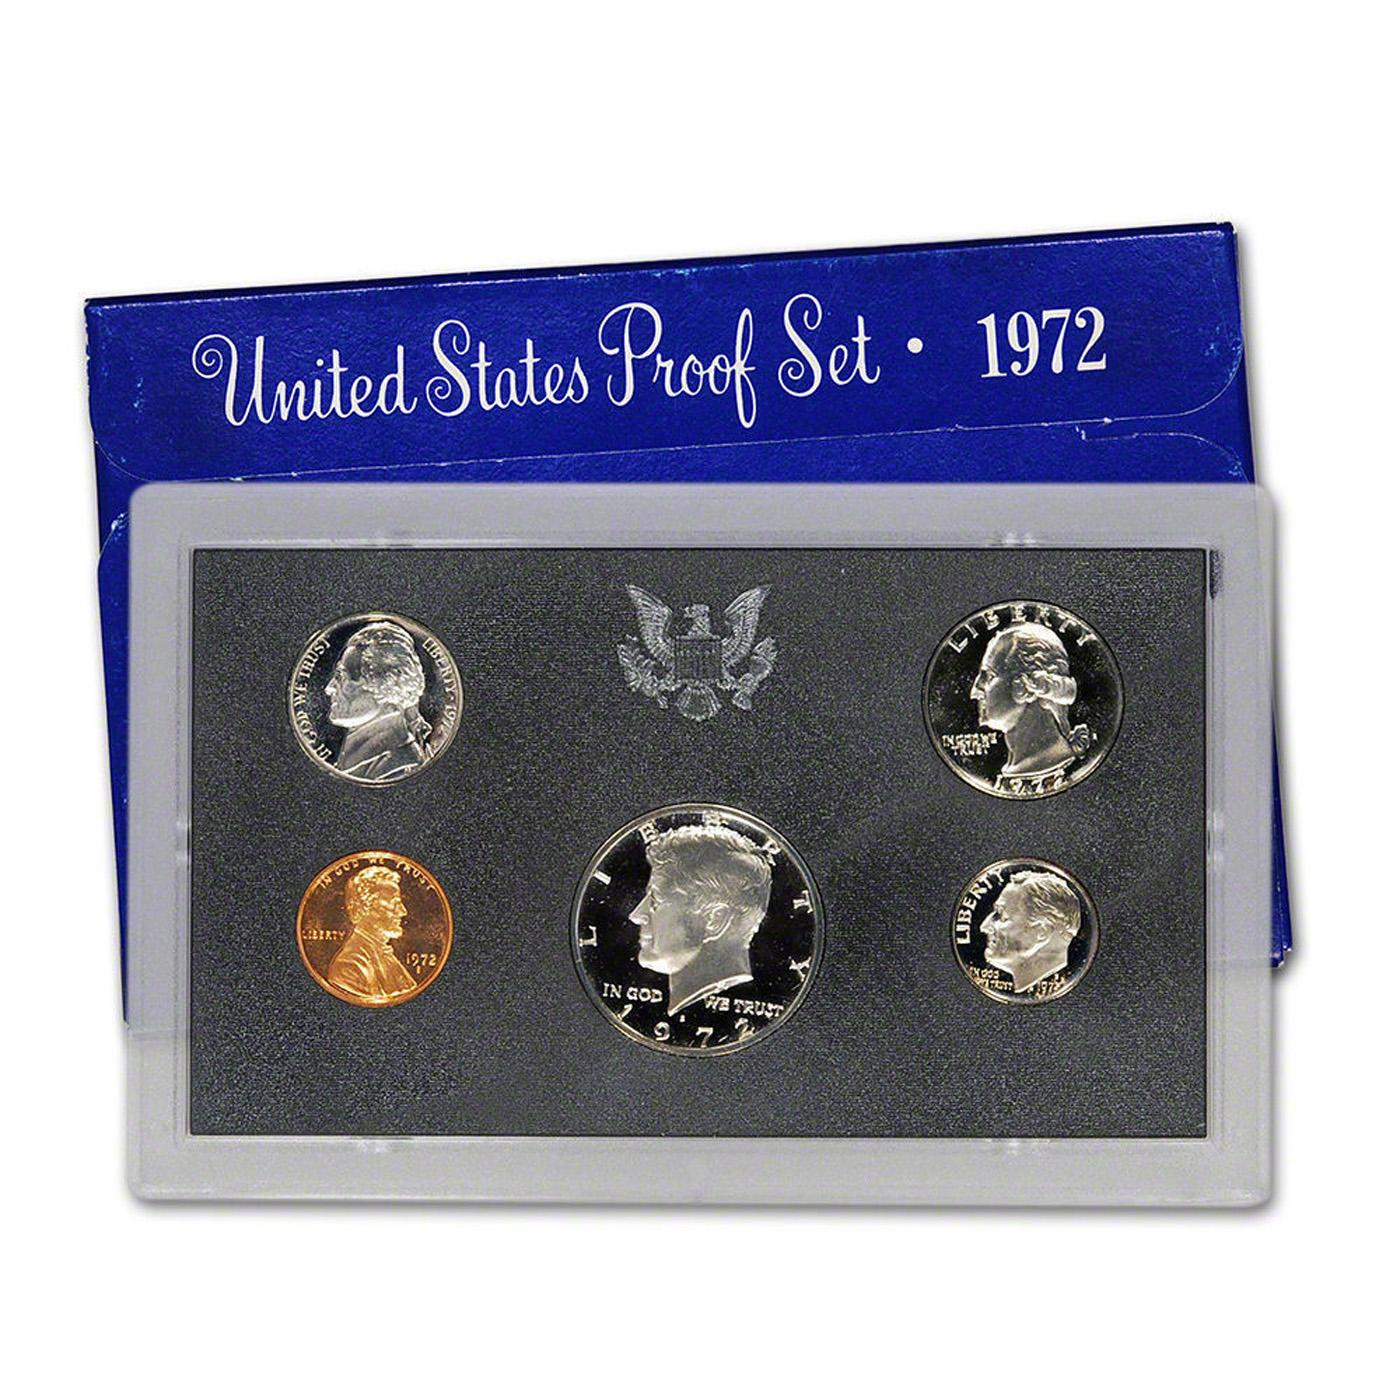 Group of 10 United States Proof Sets 1970-1979 57 coins Grades